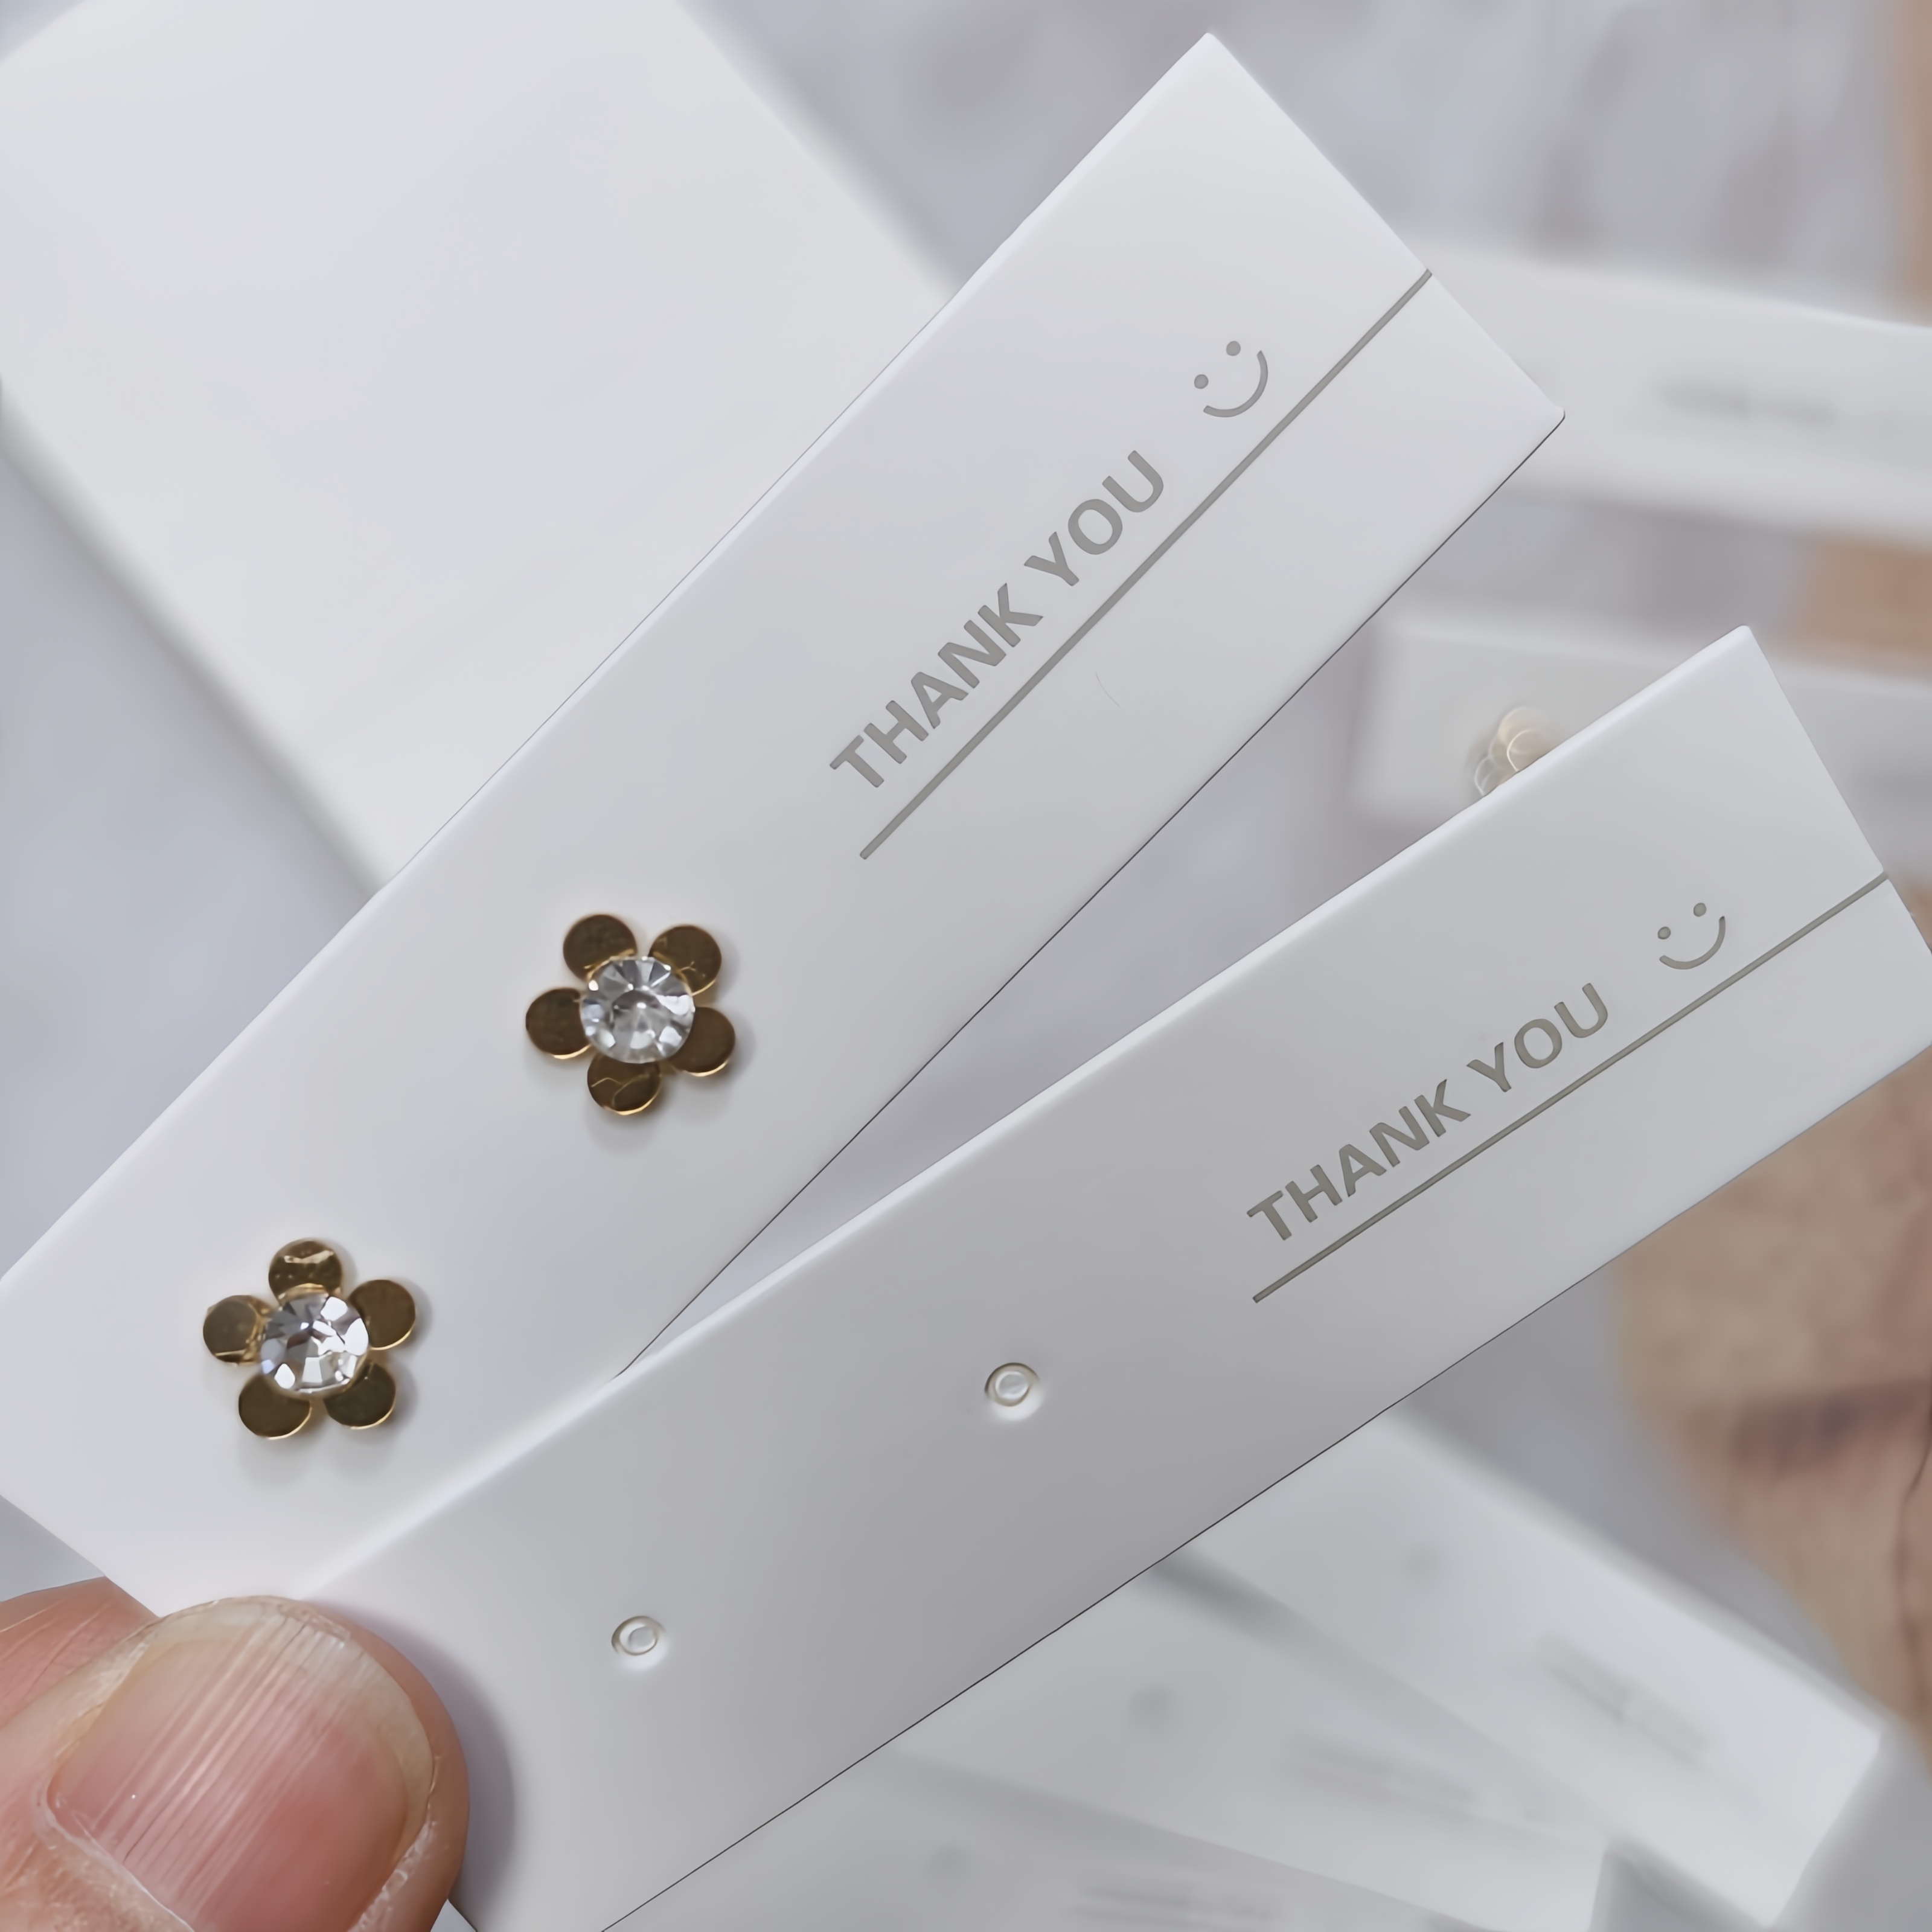 

100 Sheet Earring Card Holders, Classic White With "thank You" Print, Jewelry Display Cards For Studs, 2-slot Design, Retail Presentation And Packaging